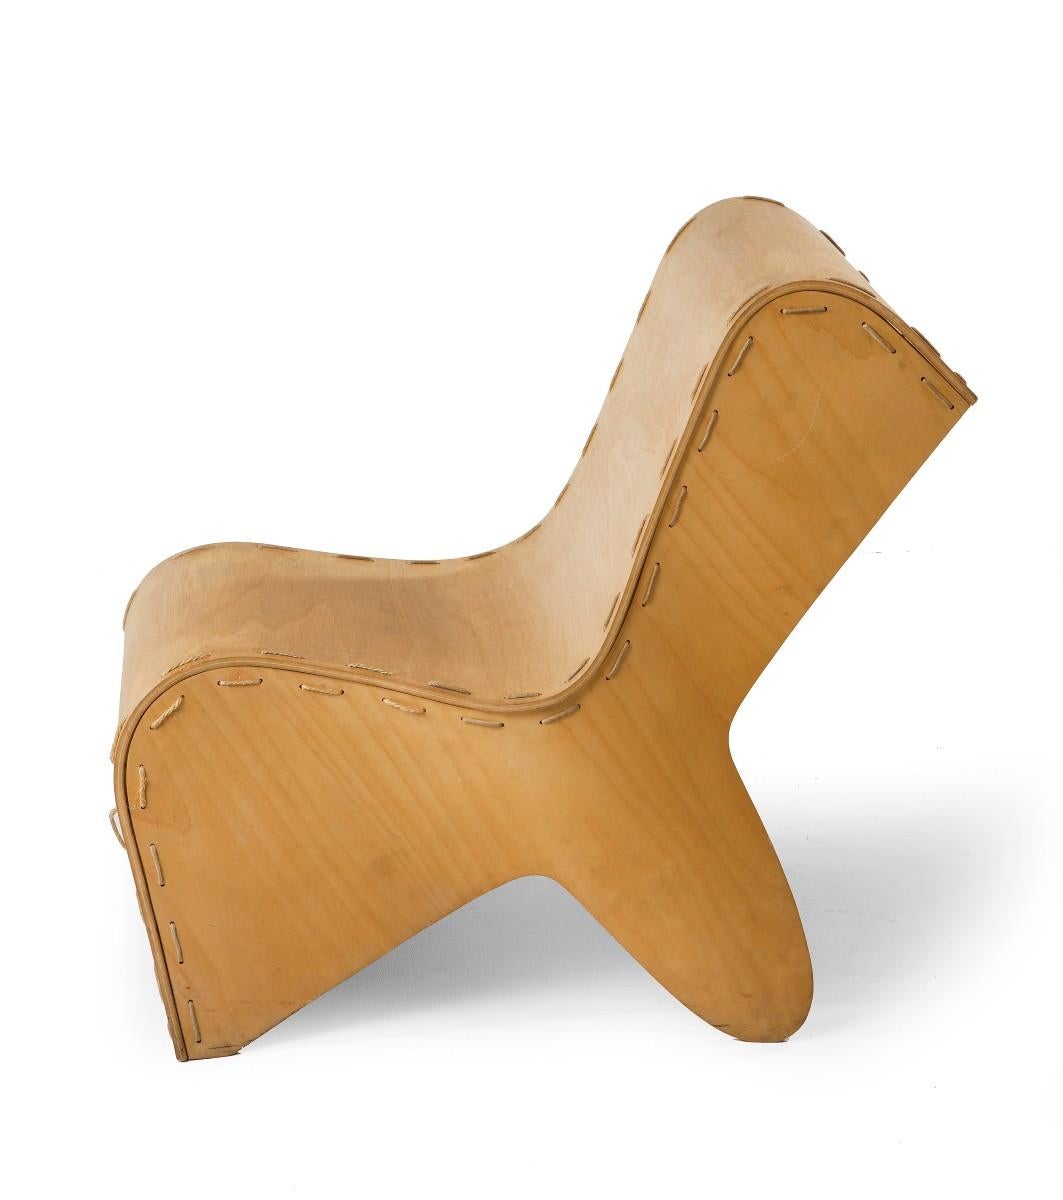 Unusual sculptural chair in plywood with the pieces stitched together with rope. This may well be a unique piece, we have as yet, been unable to find a reference as to the Designer. It is clearly vintage as there are signs of usage consistent with